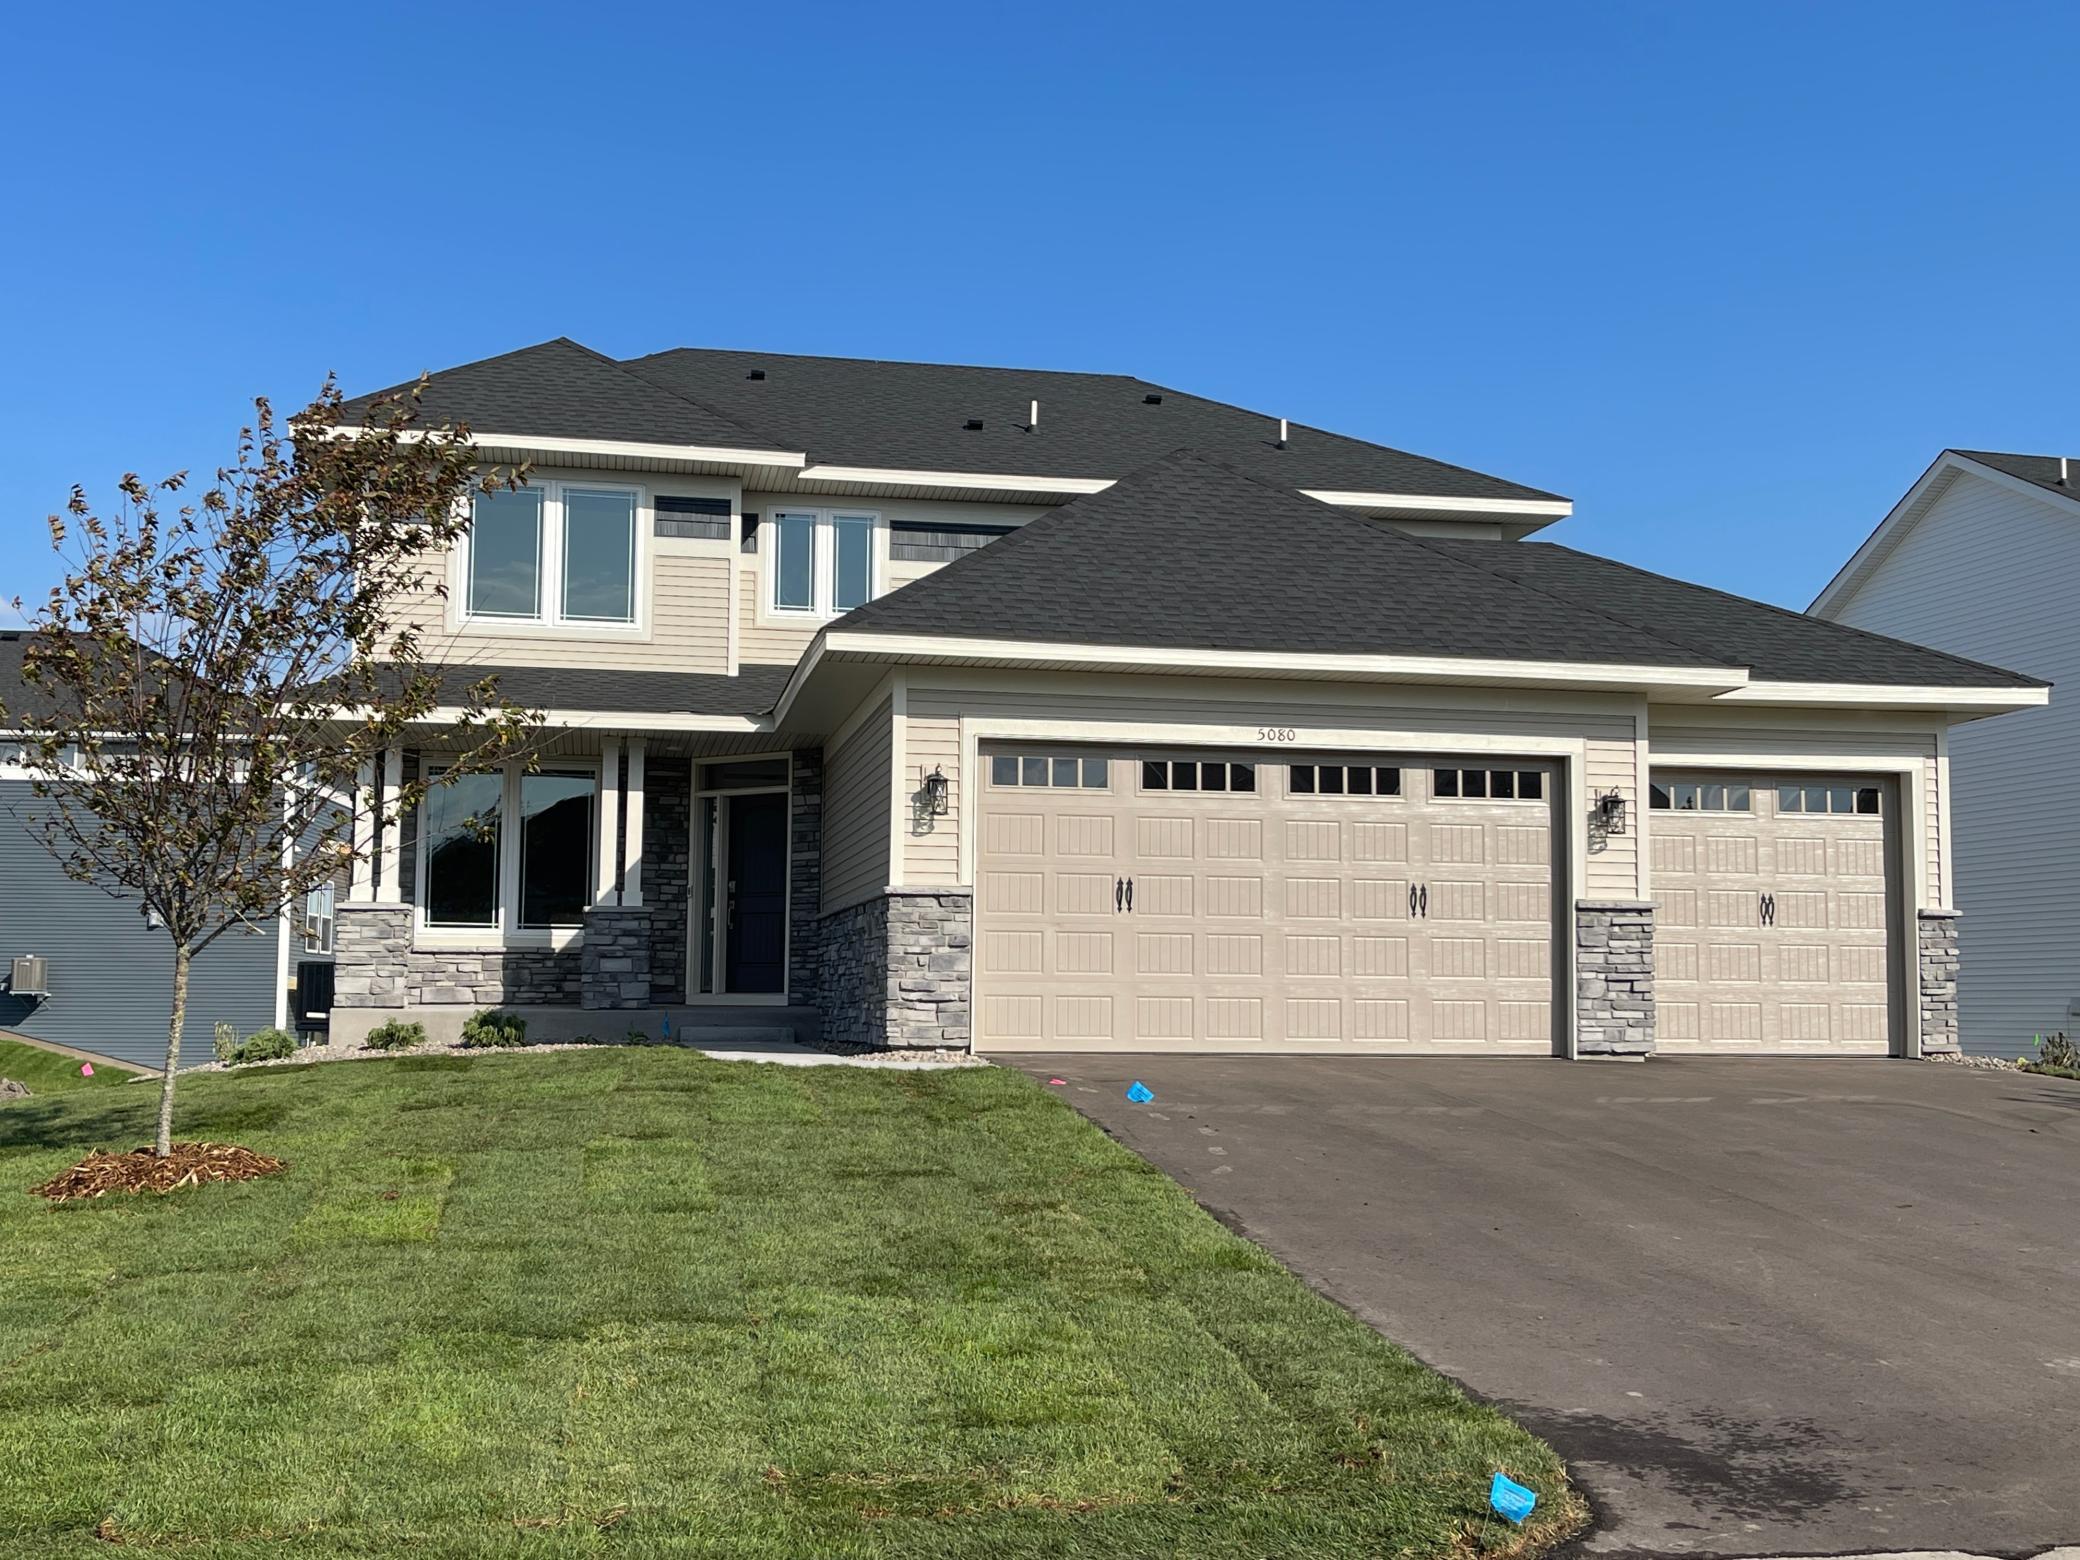 SOLD! Gorgeous Slate grey stone accents! Impressive 2-story foyer. Monterey Sand tan siding & Midnight Blue shakes. This is the popular Springfield 2-story floor plan. Irrigation, landscaping & sod included and installed!